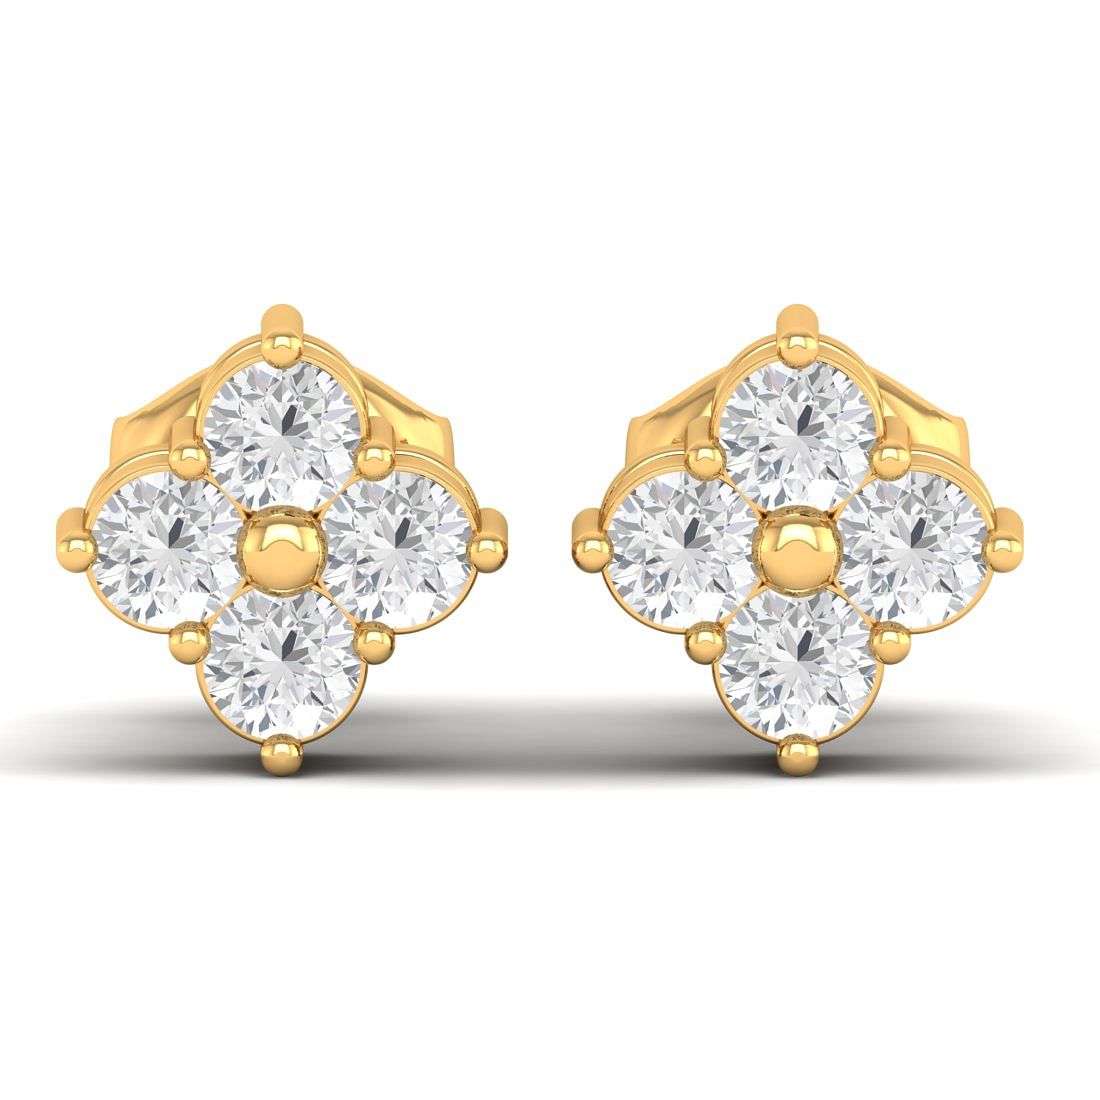 Square Yellow Gold Cluster Stud Diamond Earring For Women